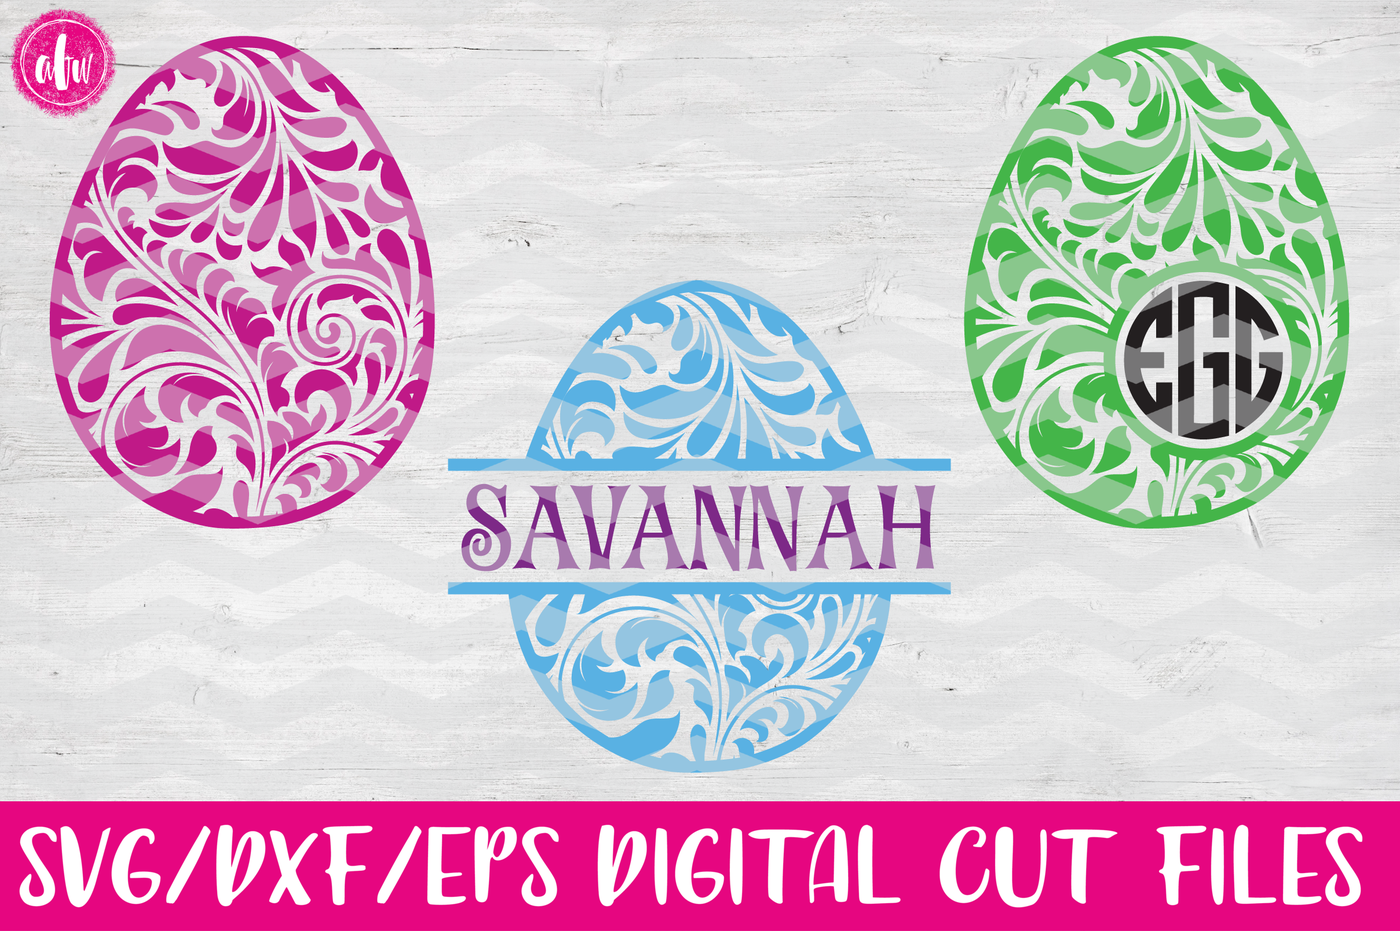 Download Flourish Patterned Easter Eggs - SVG, DXF, EPS Cut Files ...